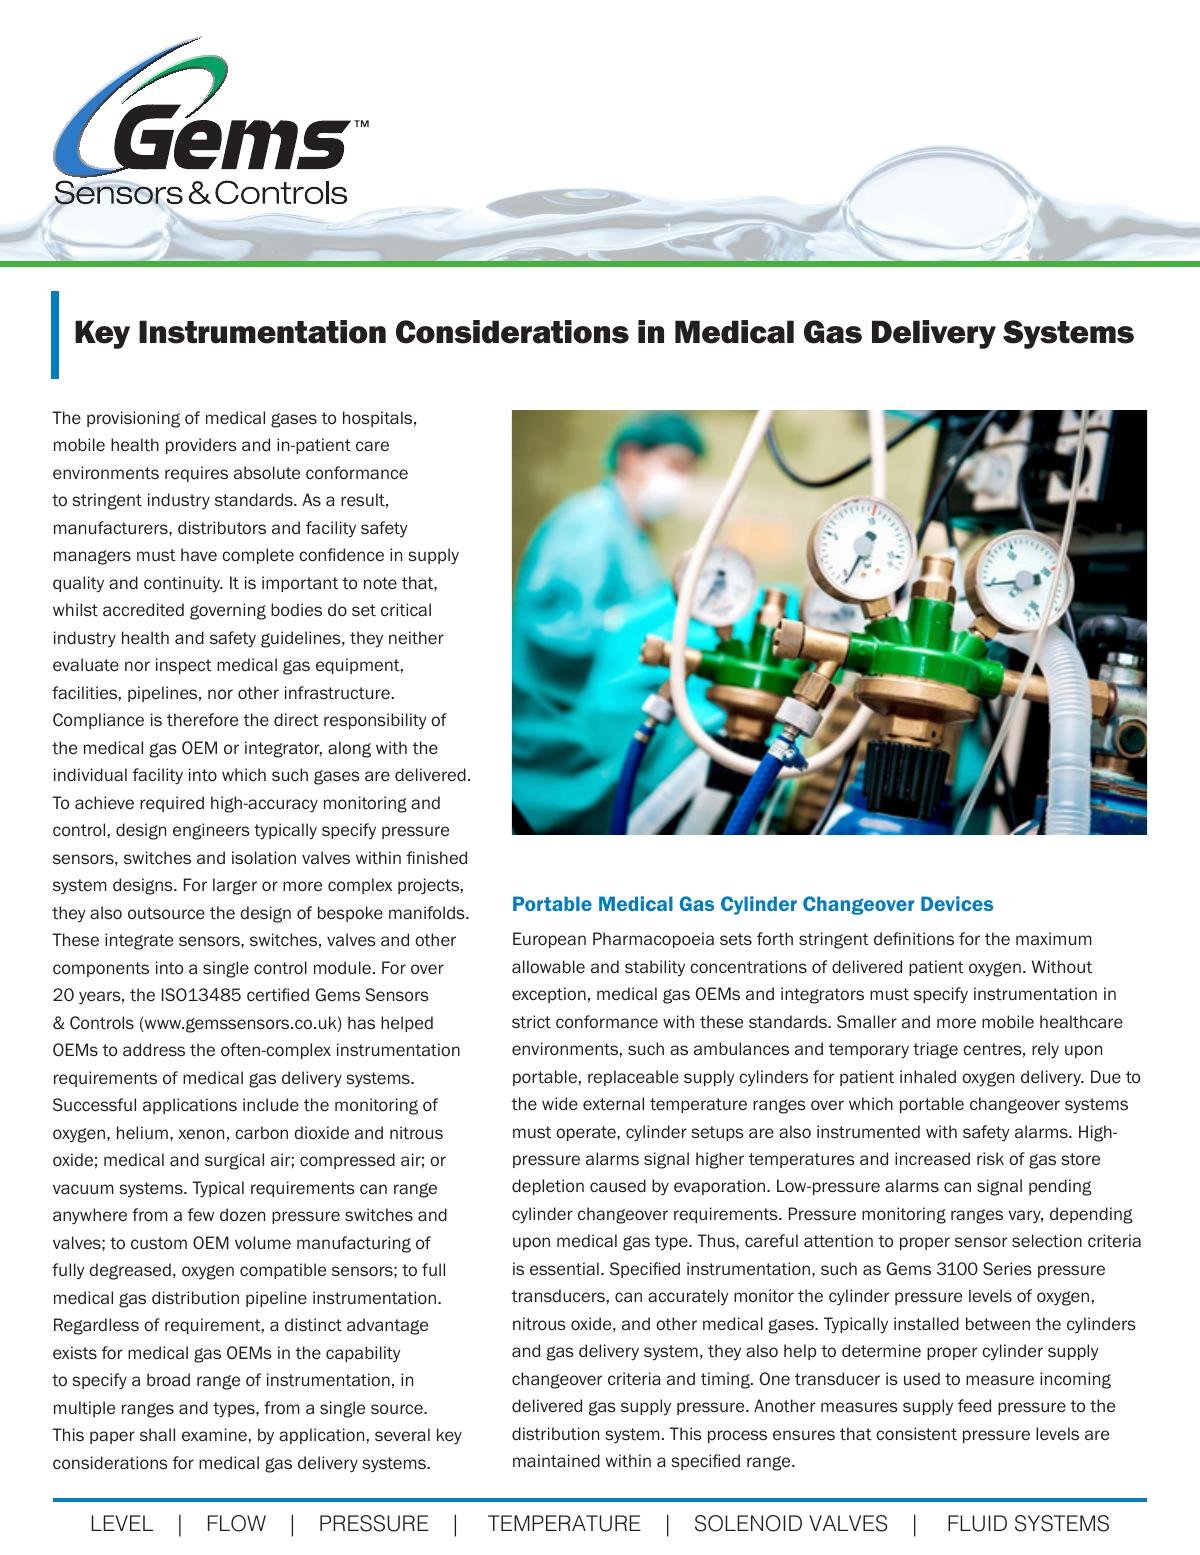 Key Instrumentation Considerations in Medical Gas Delivery Systems